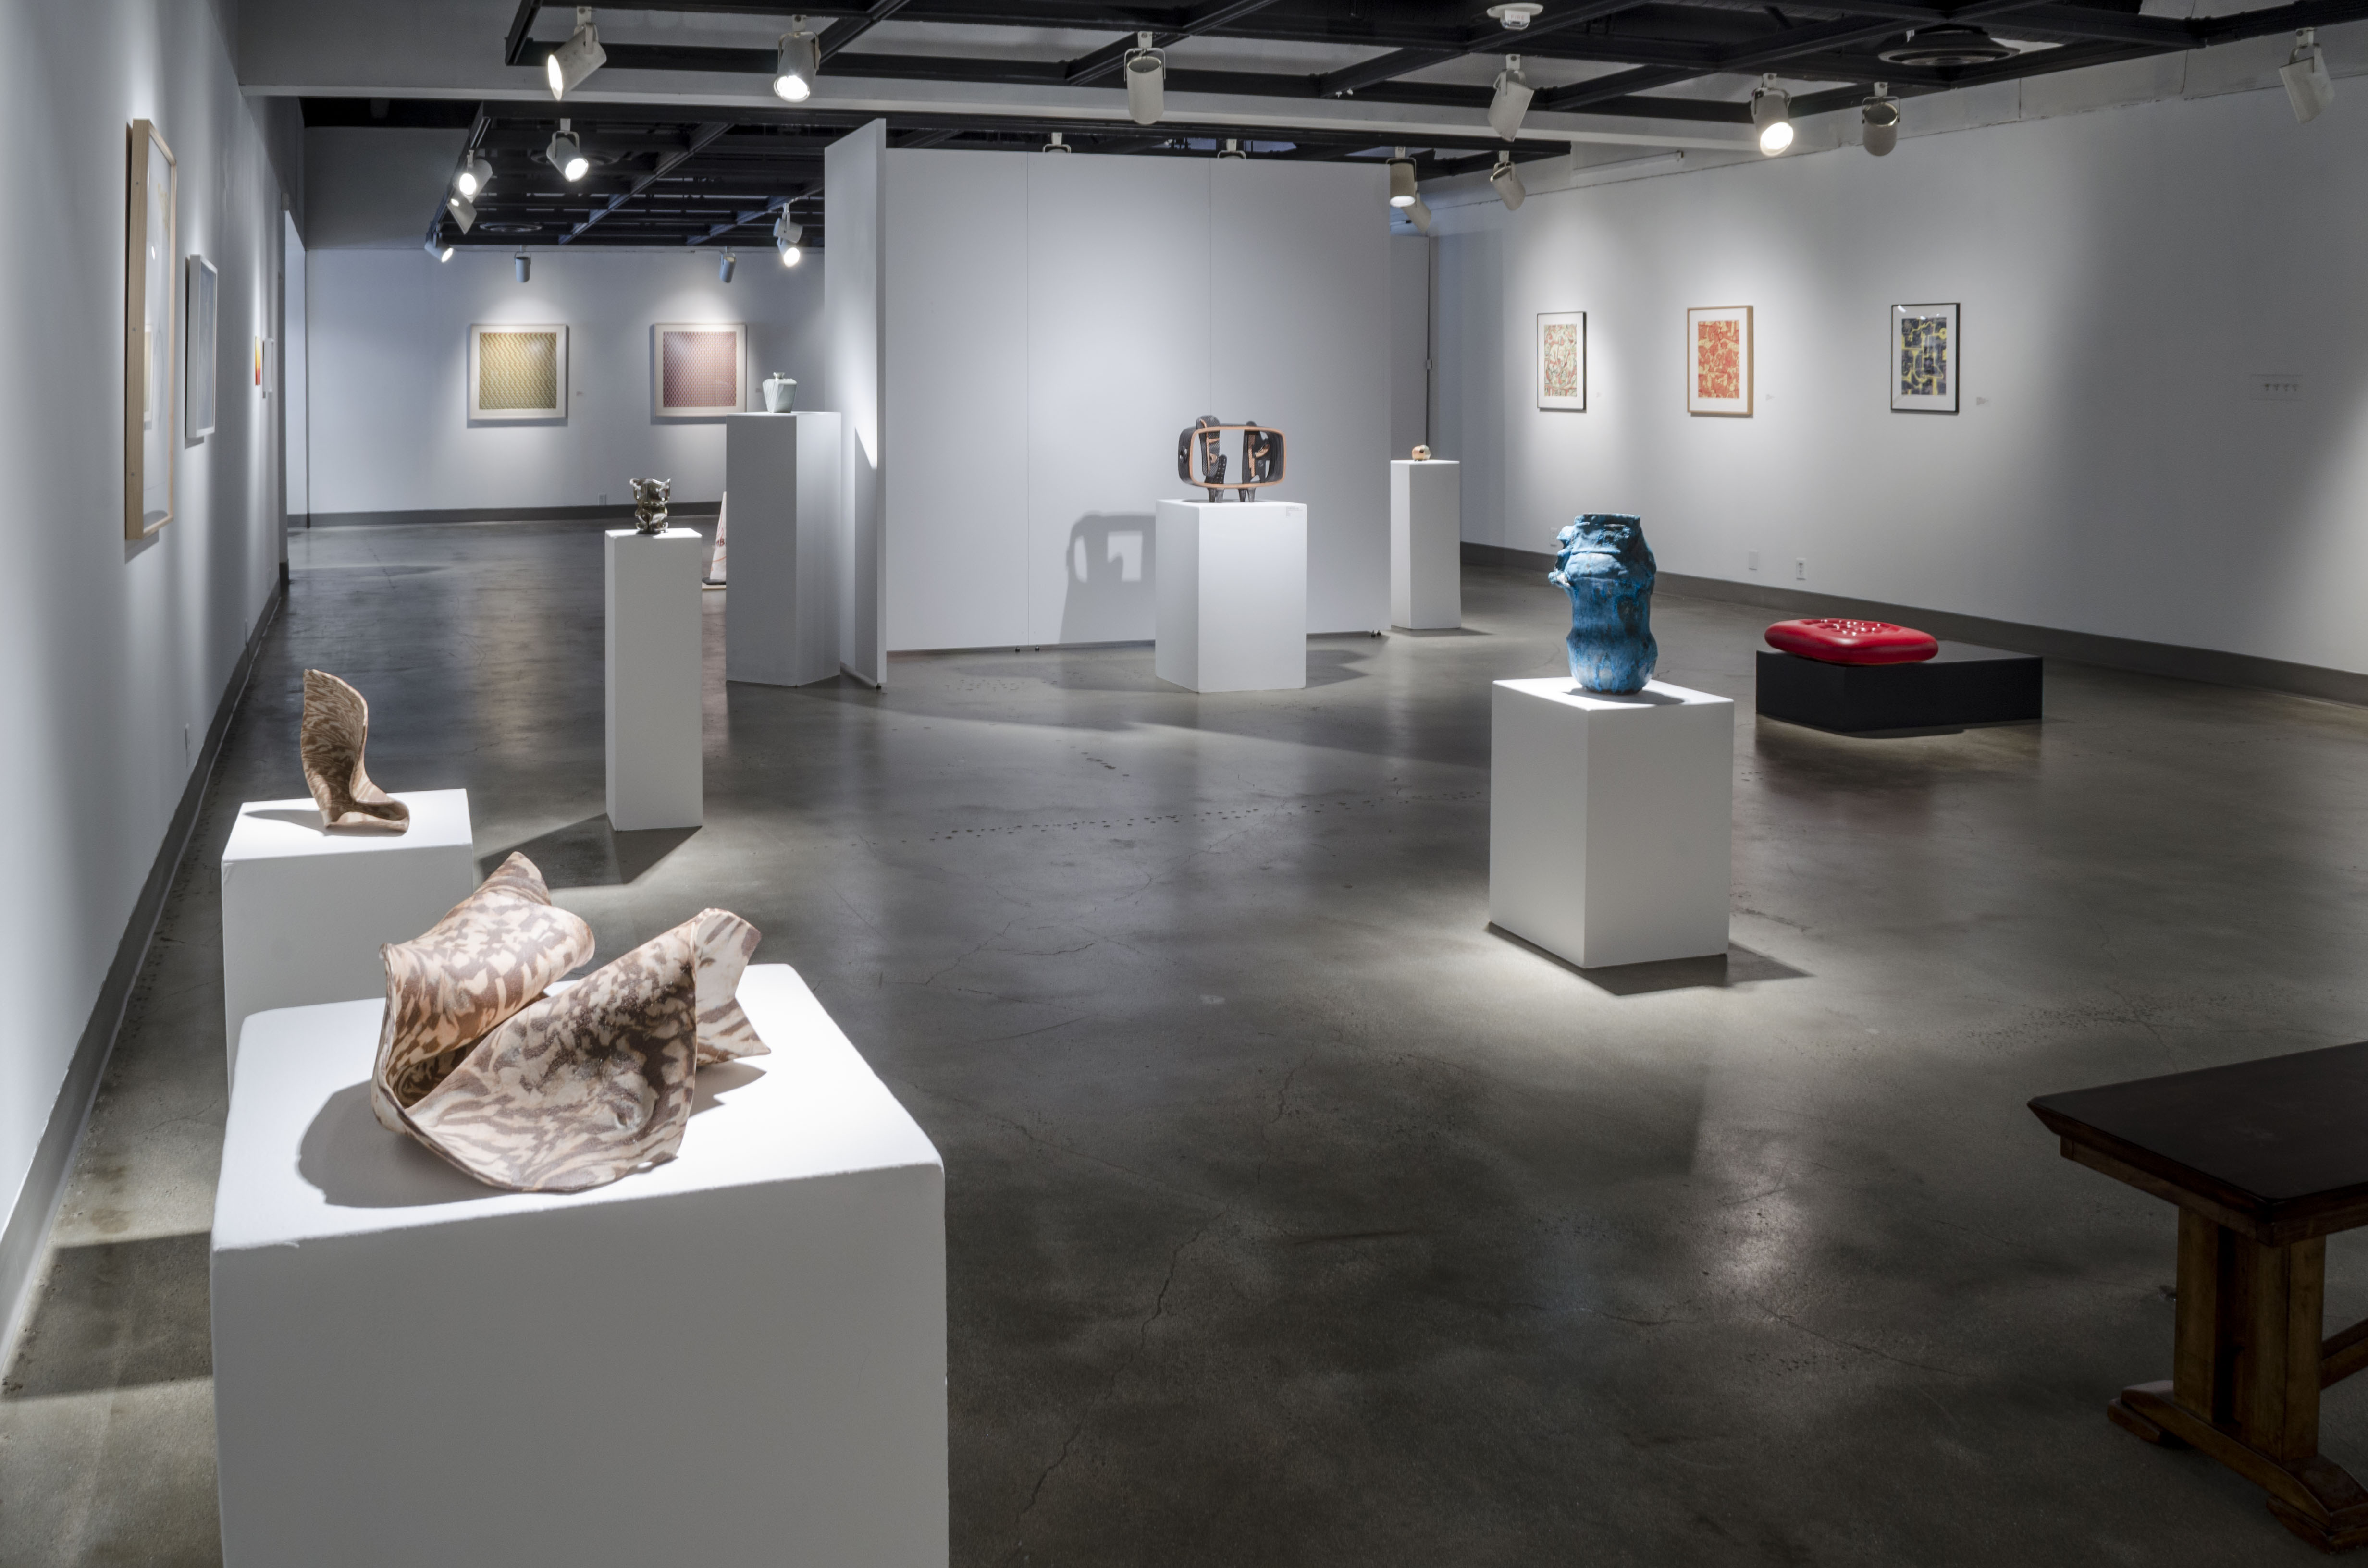 Installation View, Back Gallery, Ink & Clay 40 Exhibition, Sept. 13, 2014 to Oct. 23, 2014.